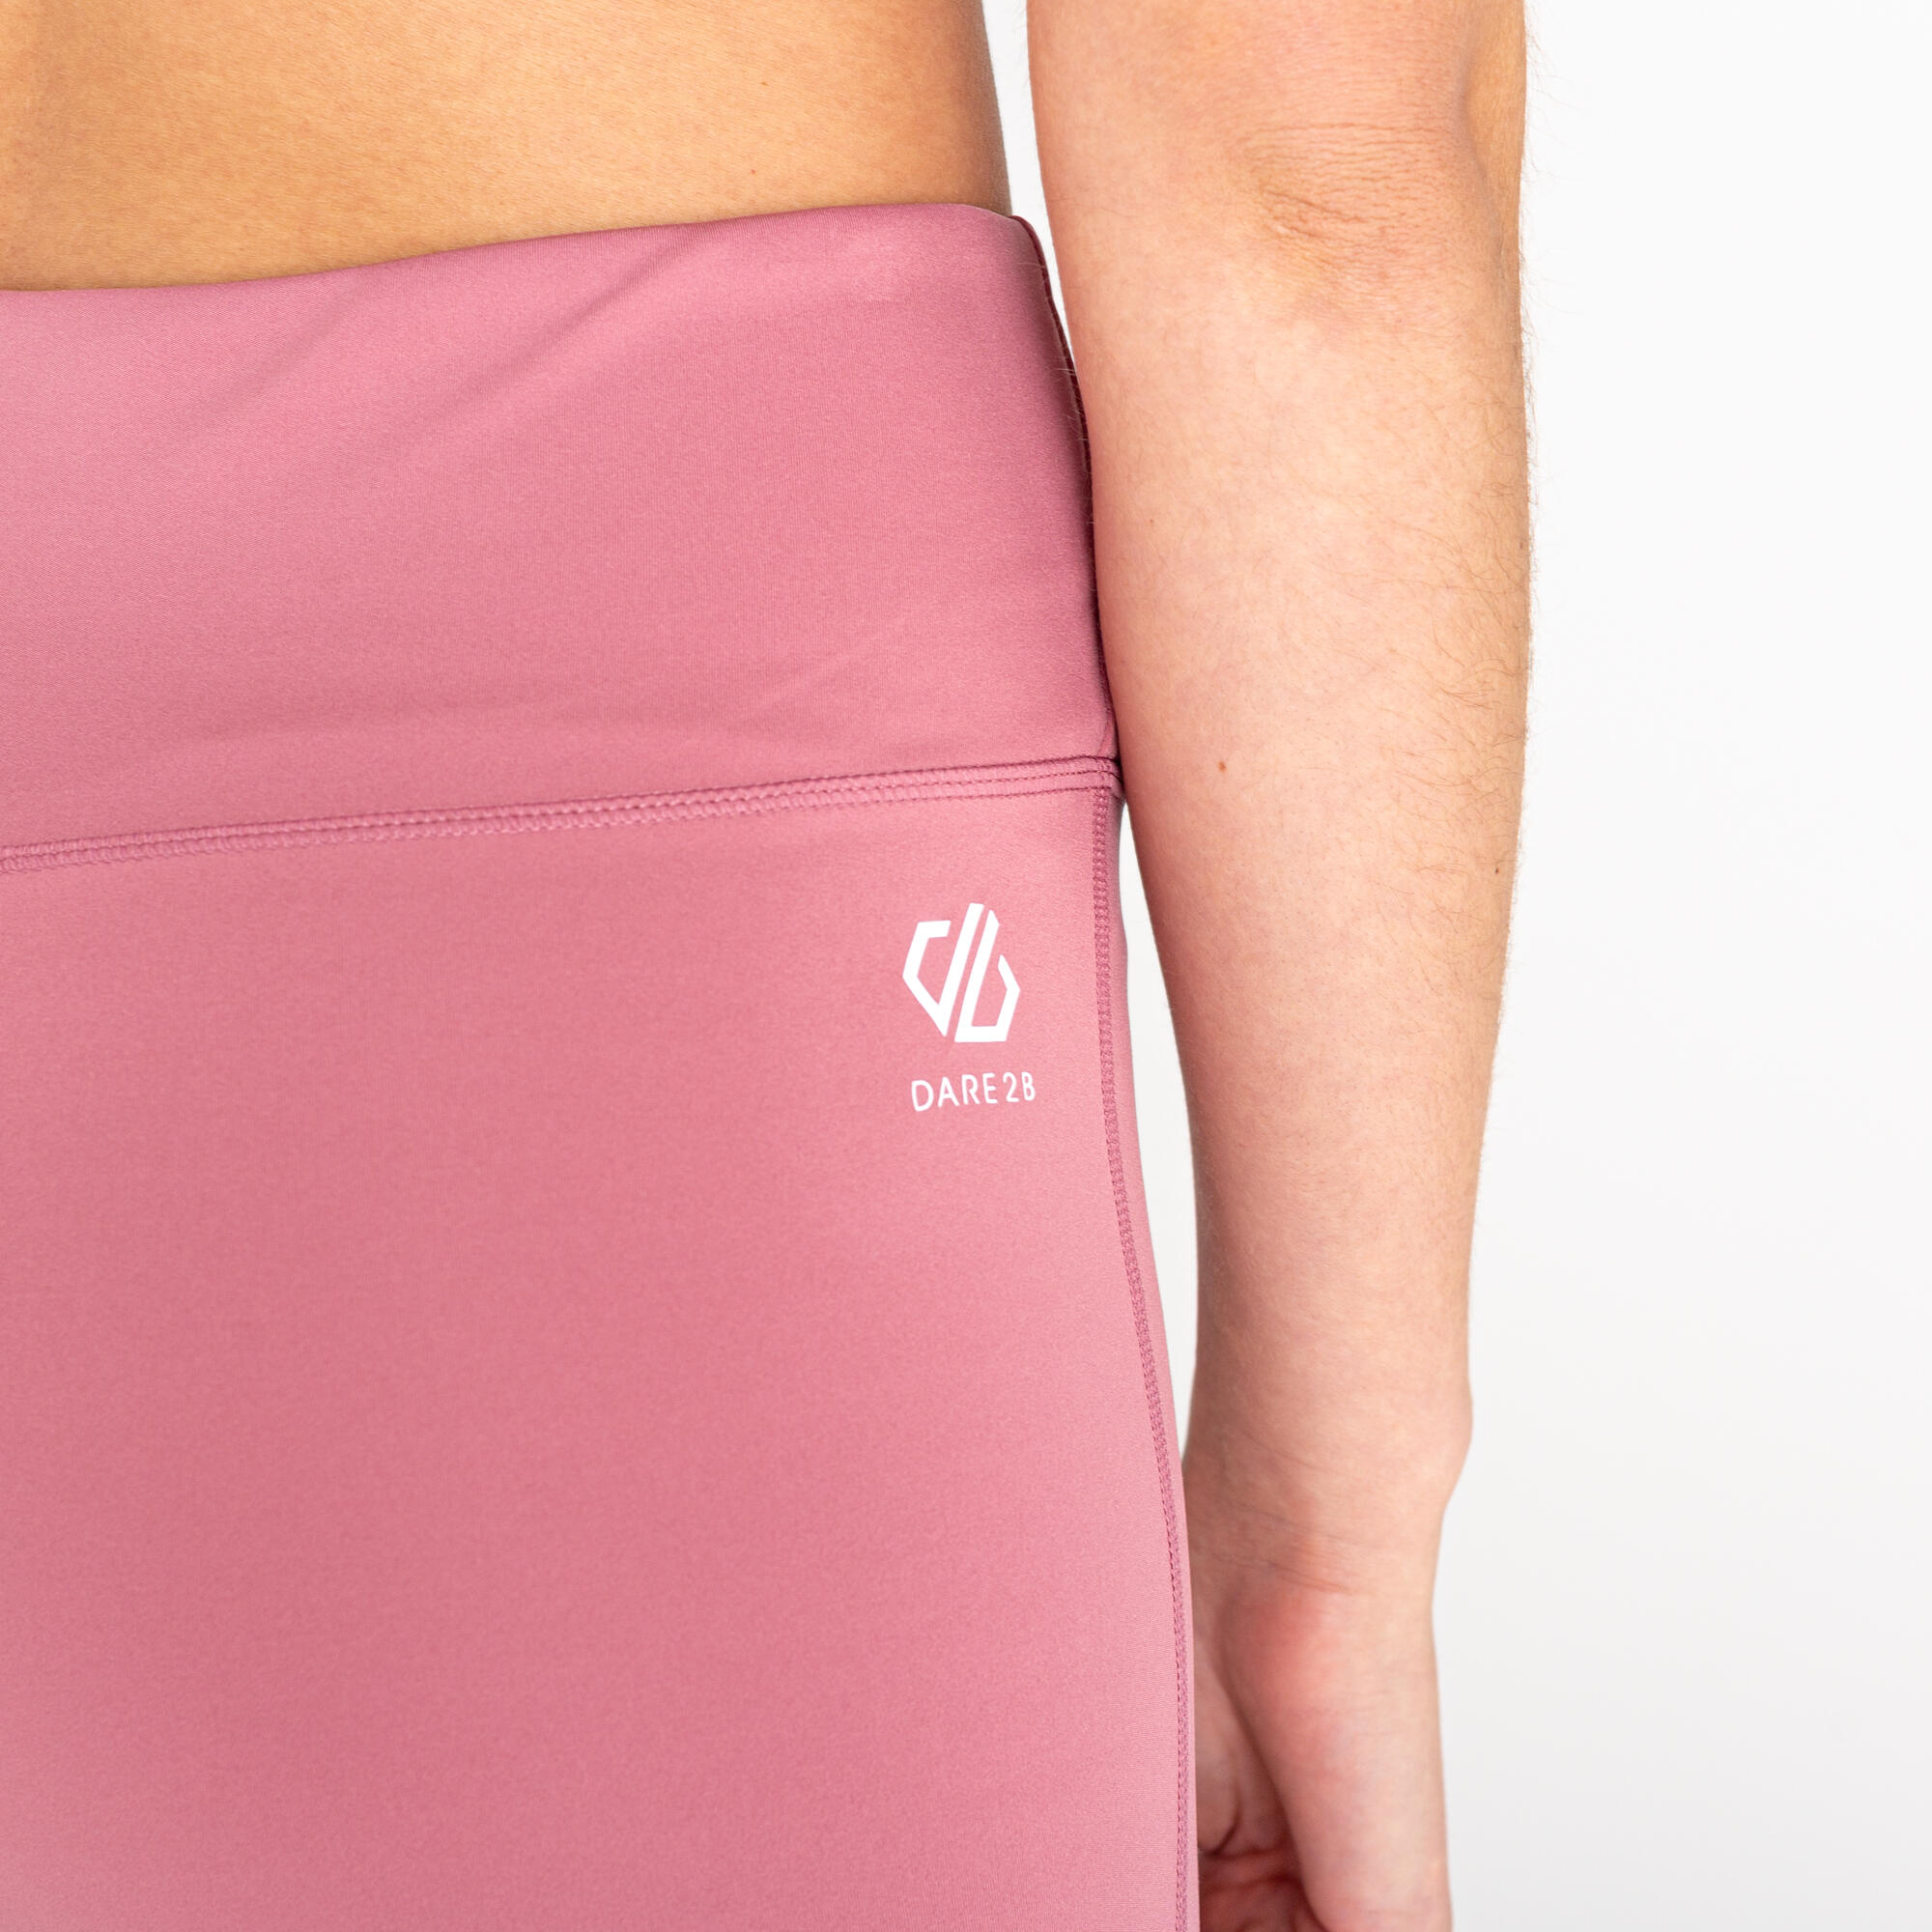 Lounge About Women's Fitness Cropped Leggings - Light Pink 5/5